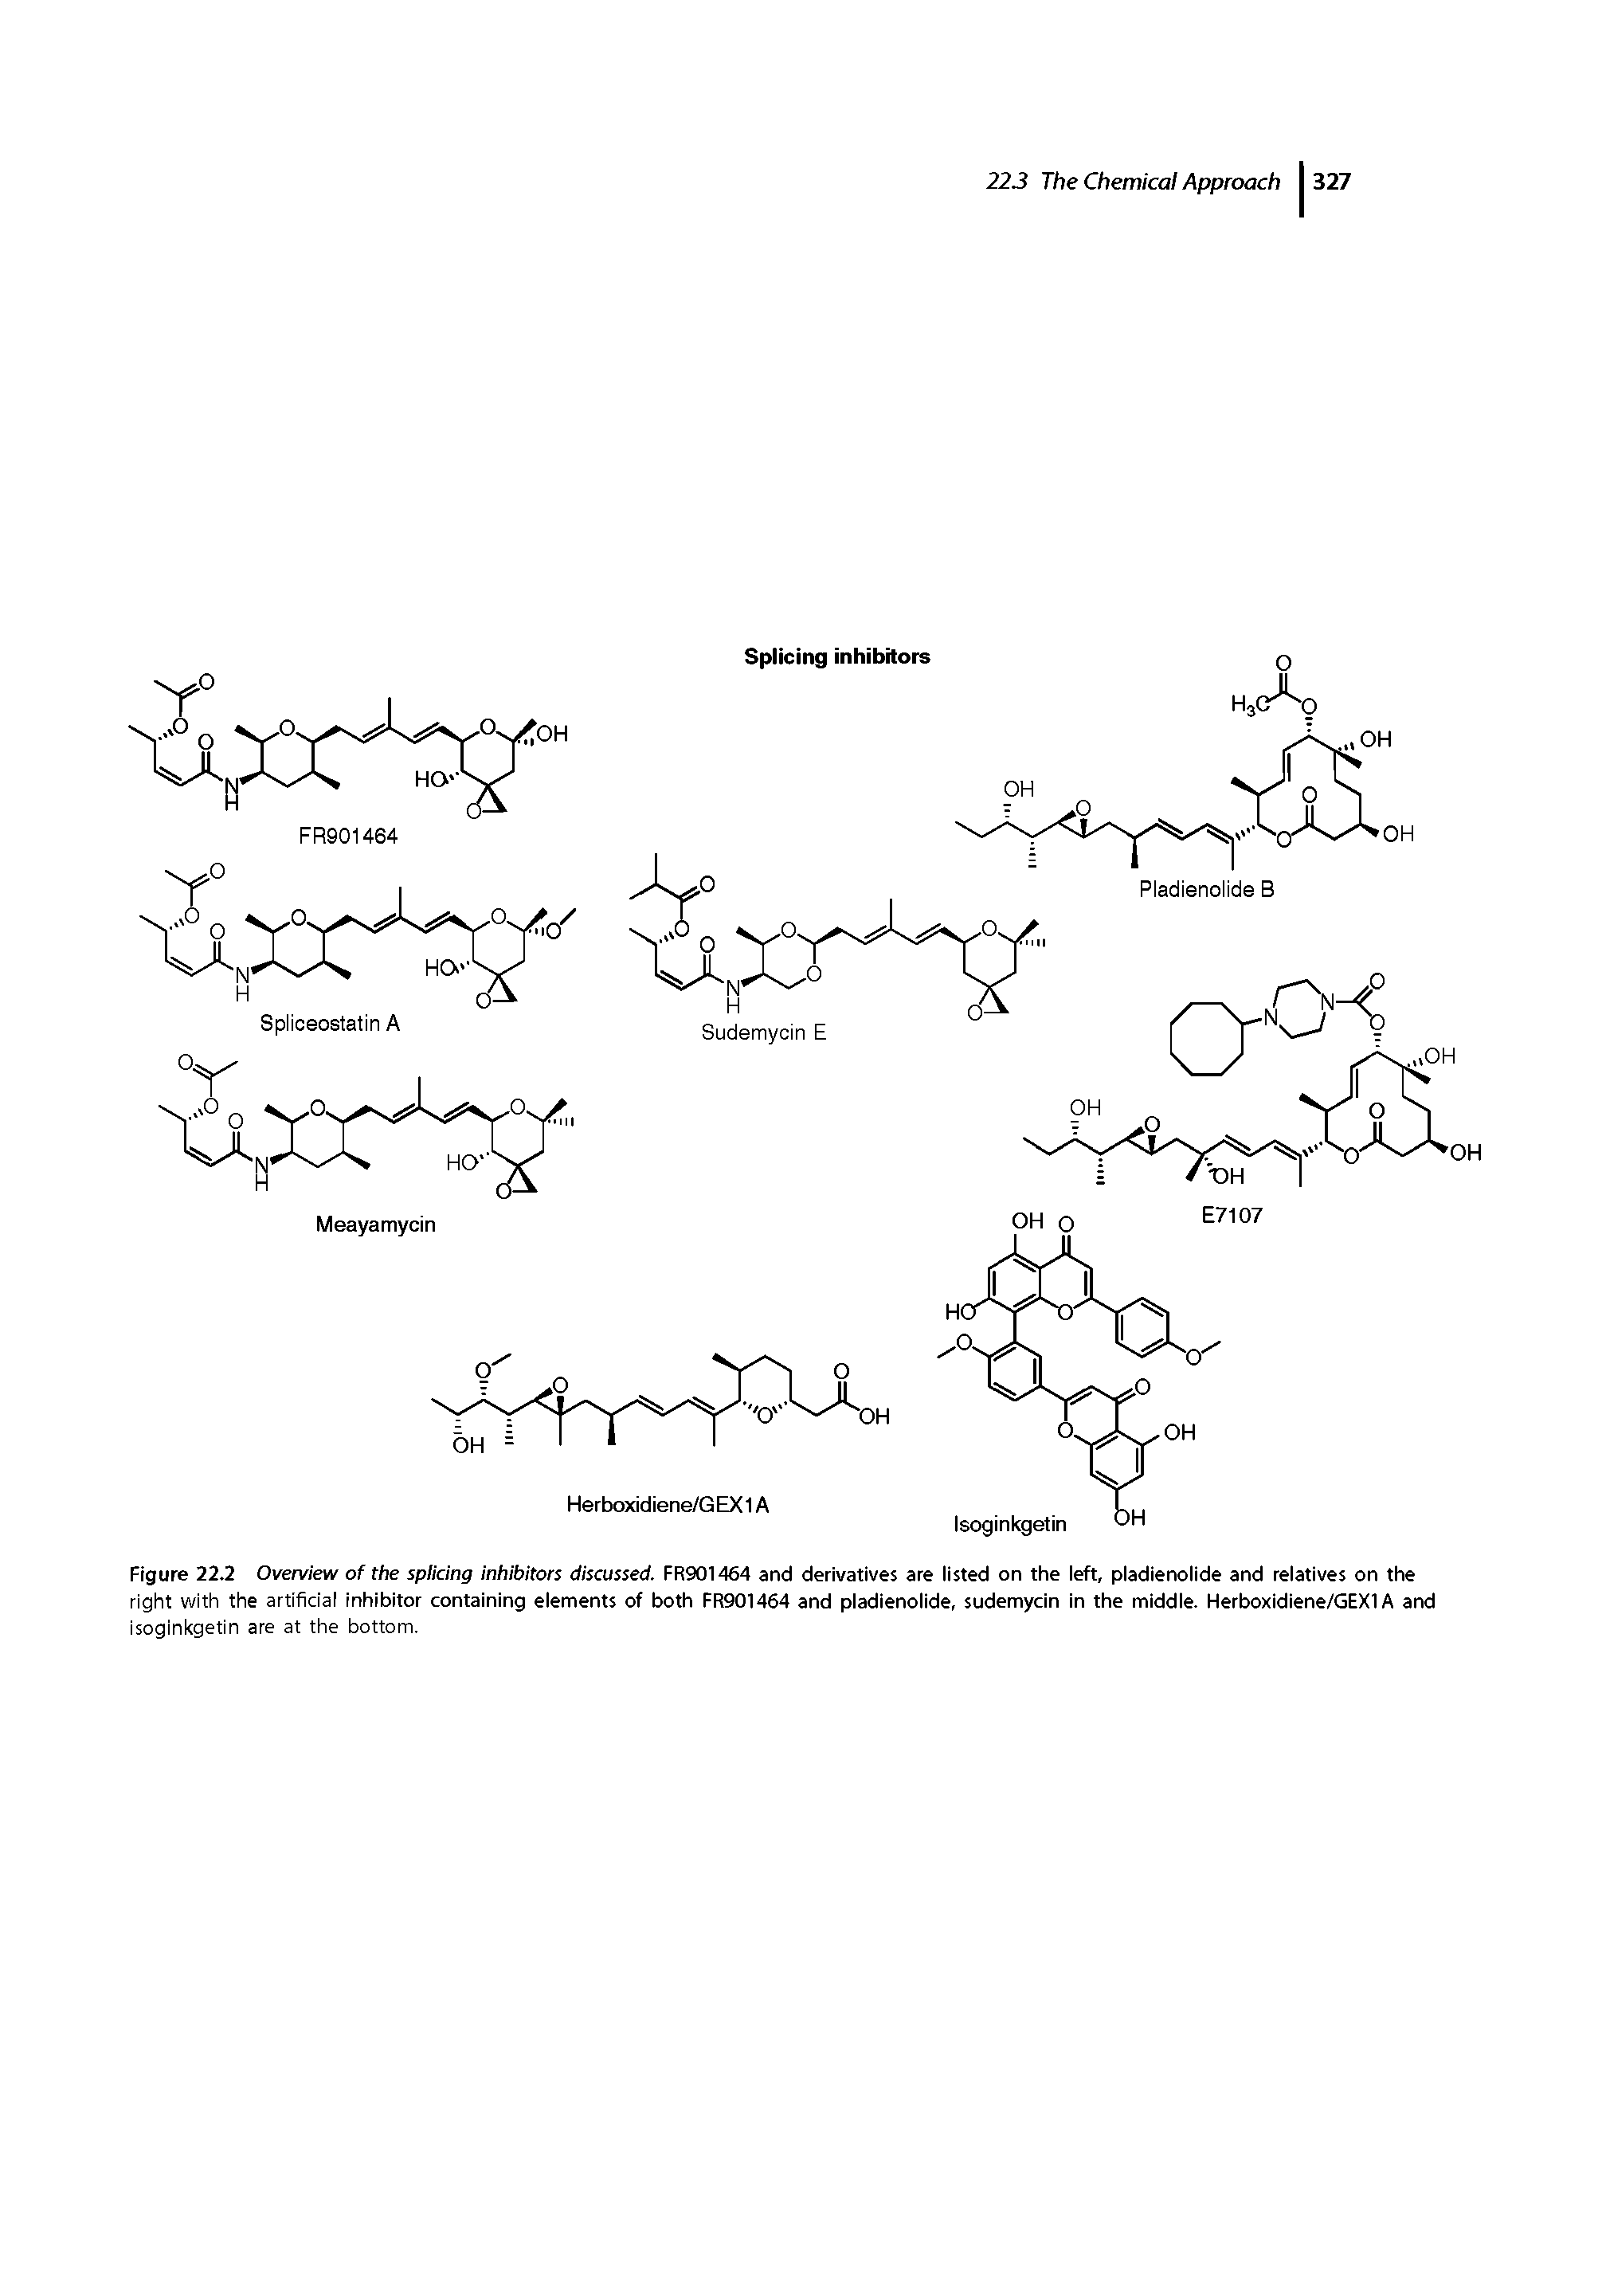 Figure 22.2 Ovennew of the splicing inhibitors discussed. FR901464 and derivatives are listed on the left, pladienolide and relatives on the right with the artificial inhibitor containing elements of both FR901464 and pladienolide, sudemycin in the middle. Herboxidiene/GEXl A and isoginkgetin are at the bottom.